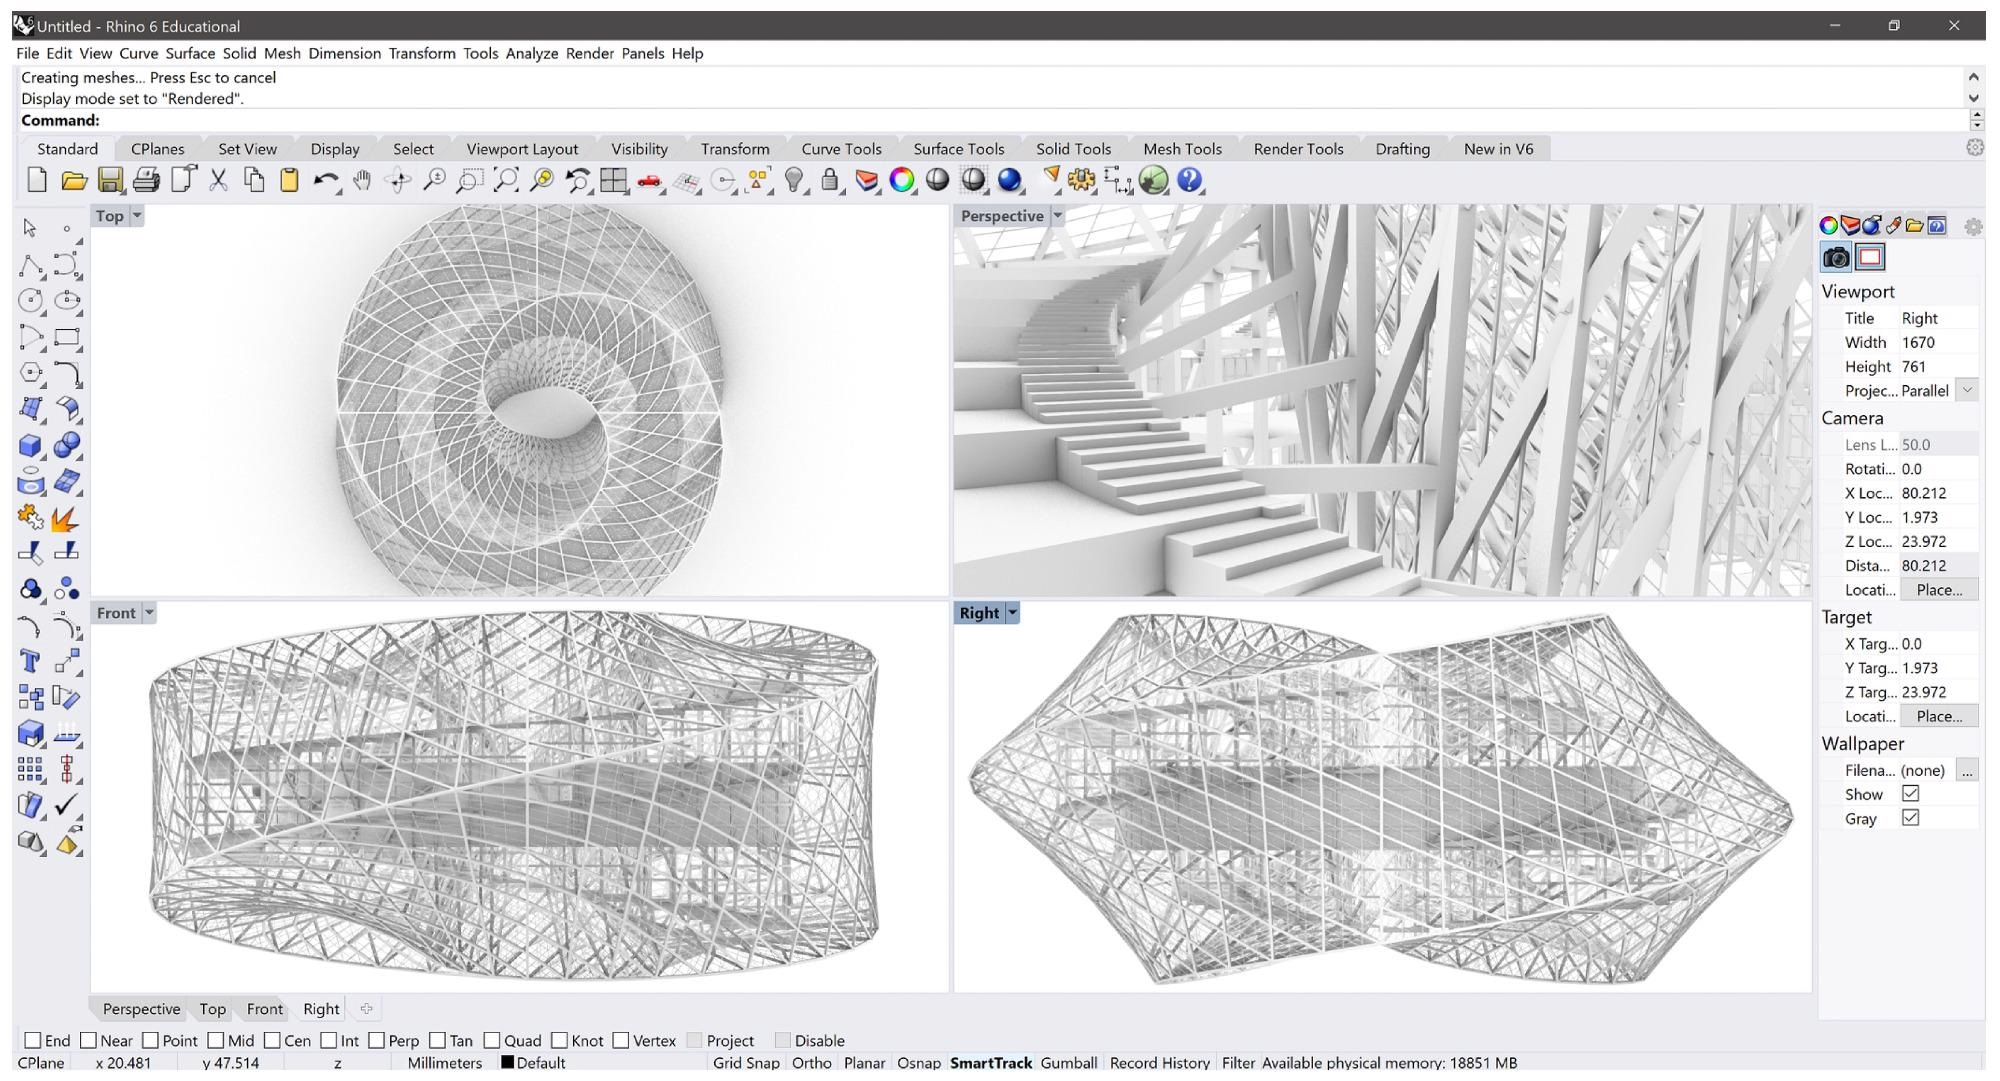 Rendered ANL model in Rhinoceros 3D shown in the 4 default viewports (top, perspective, front, and right view).